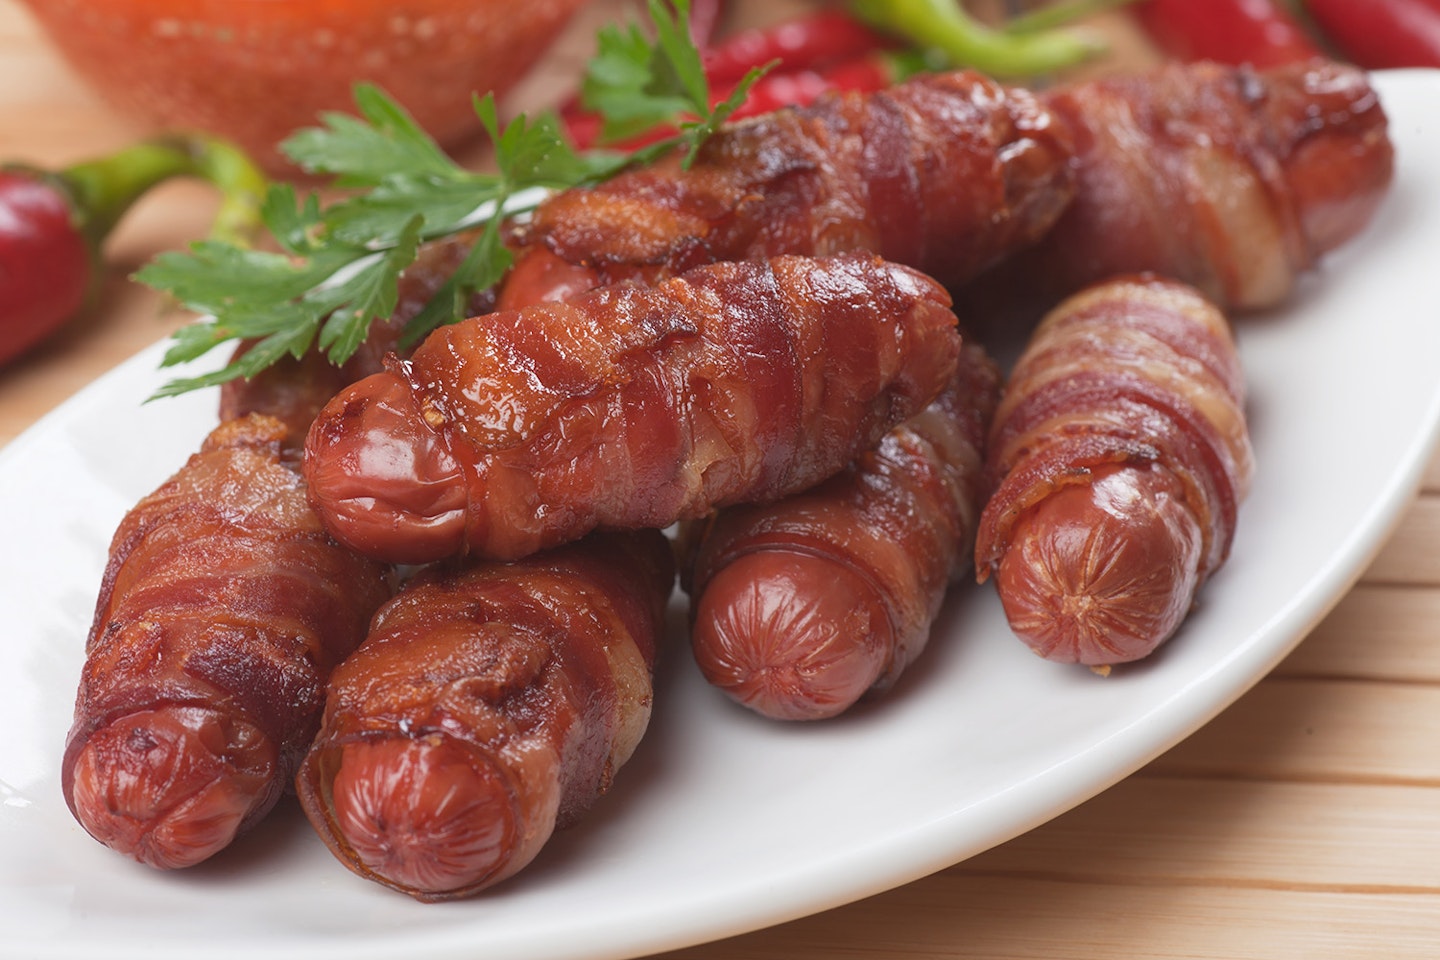 pigs blankets